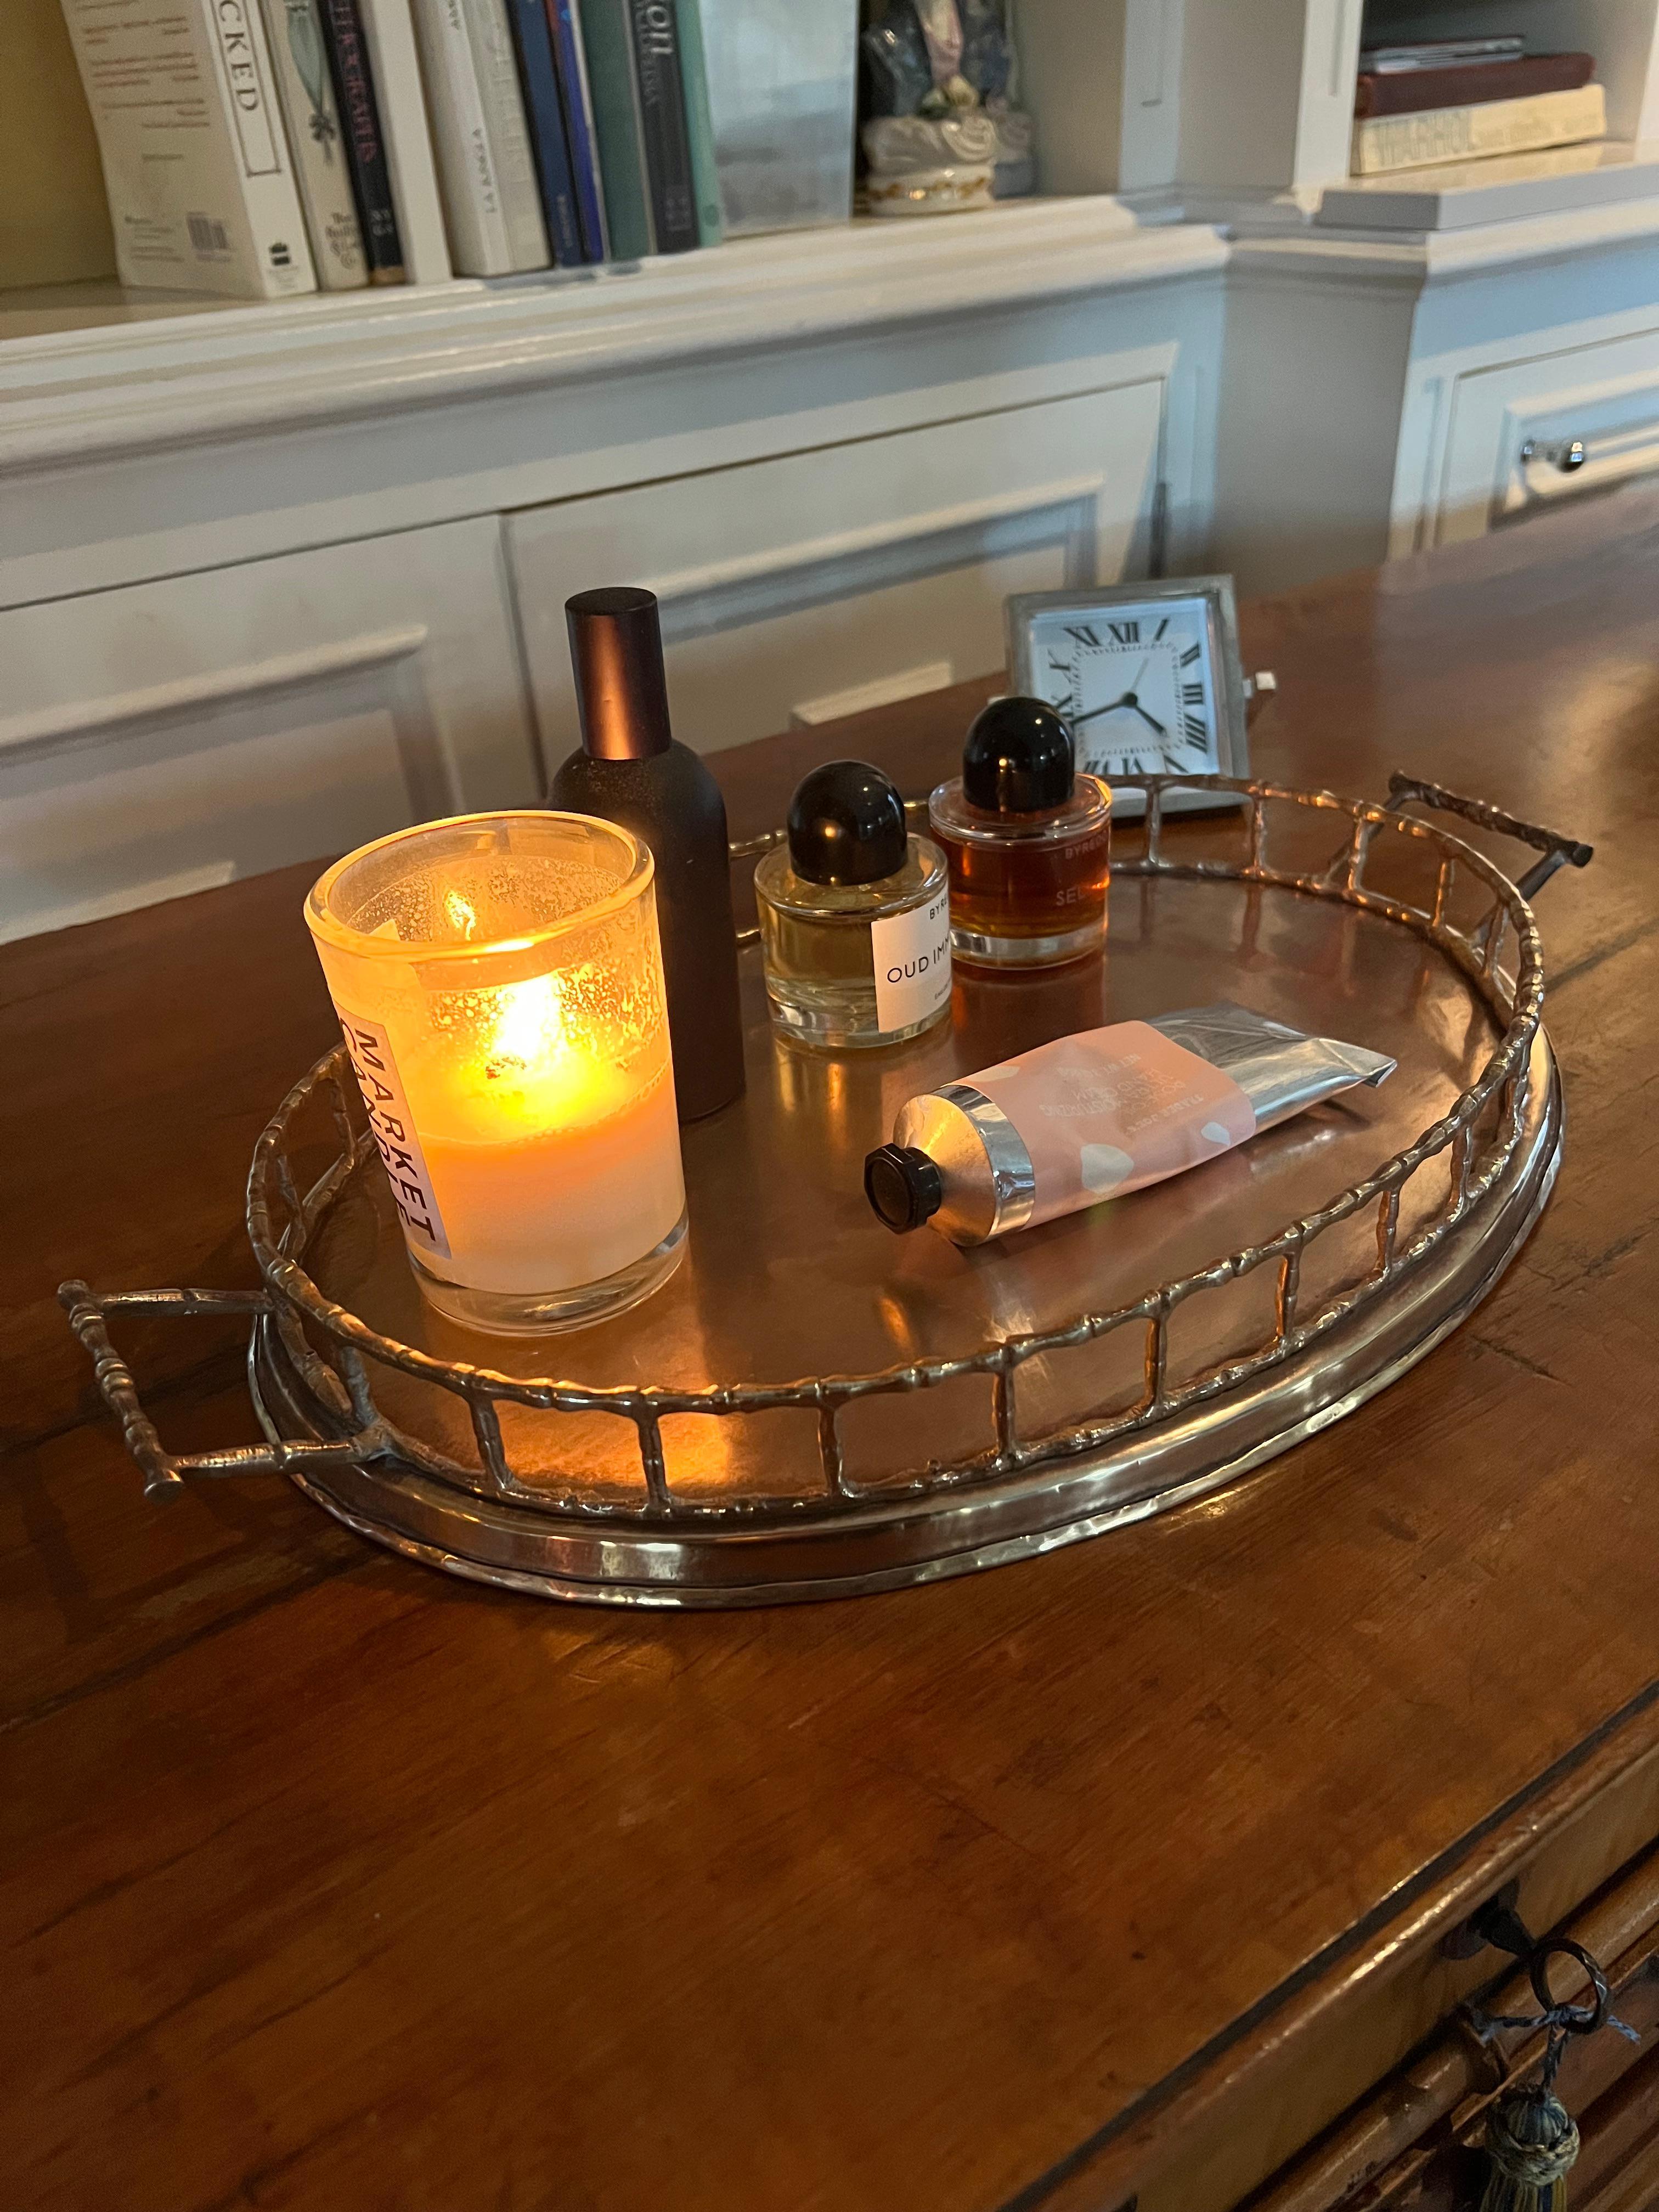 Brass Bamboo Tray - these trays are very popular and make a lovely presentation or decorative piece. Made of solid Brass with a bamboo style motif the tray is large and round. Perfect for outdoor entertaining or for the bar that serves a lot of